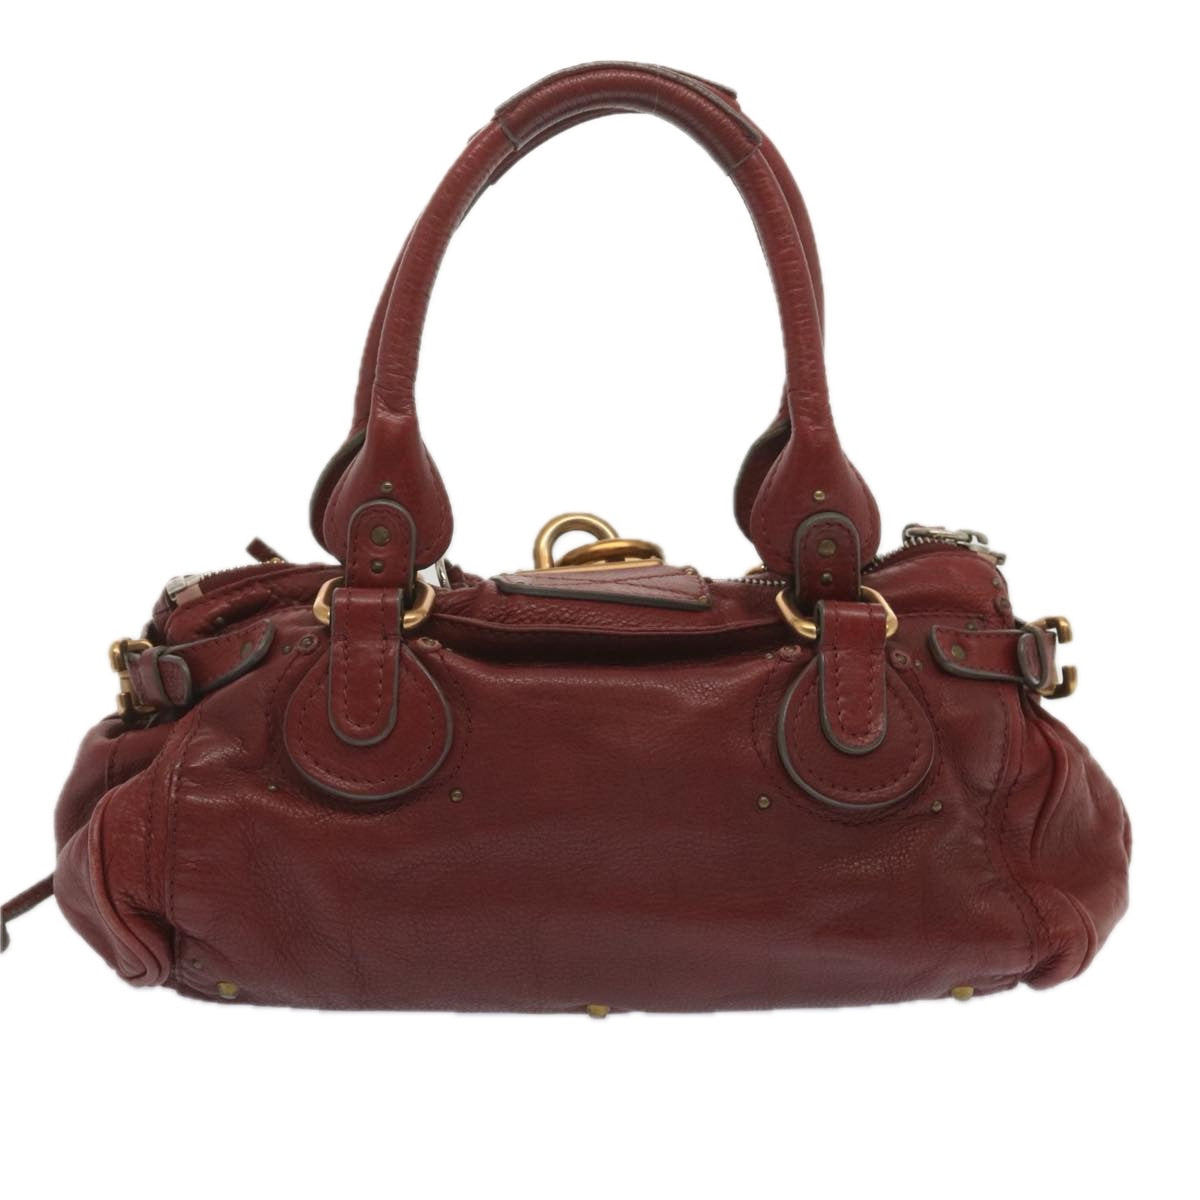 Chloe Hand Bag Leather Red 03 05 53 Auth 61485 - 0